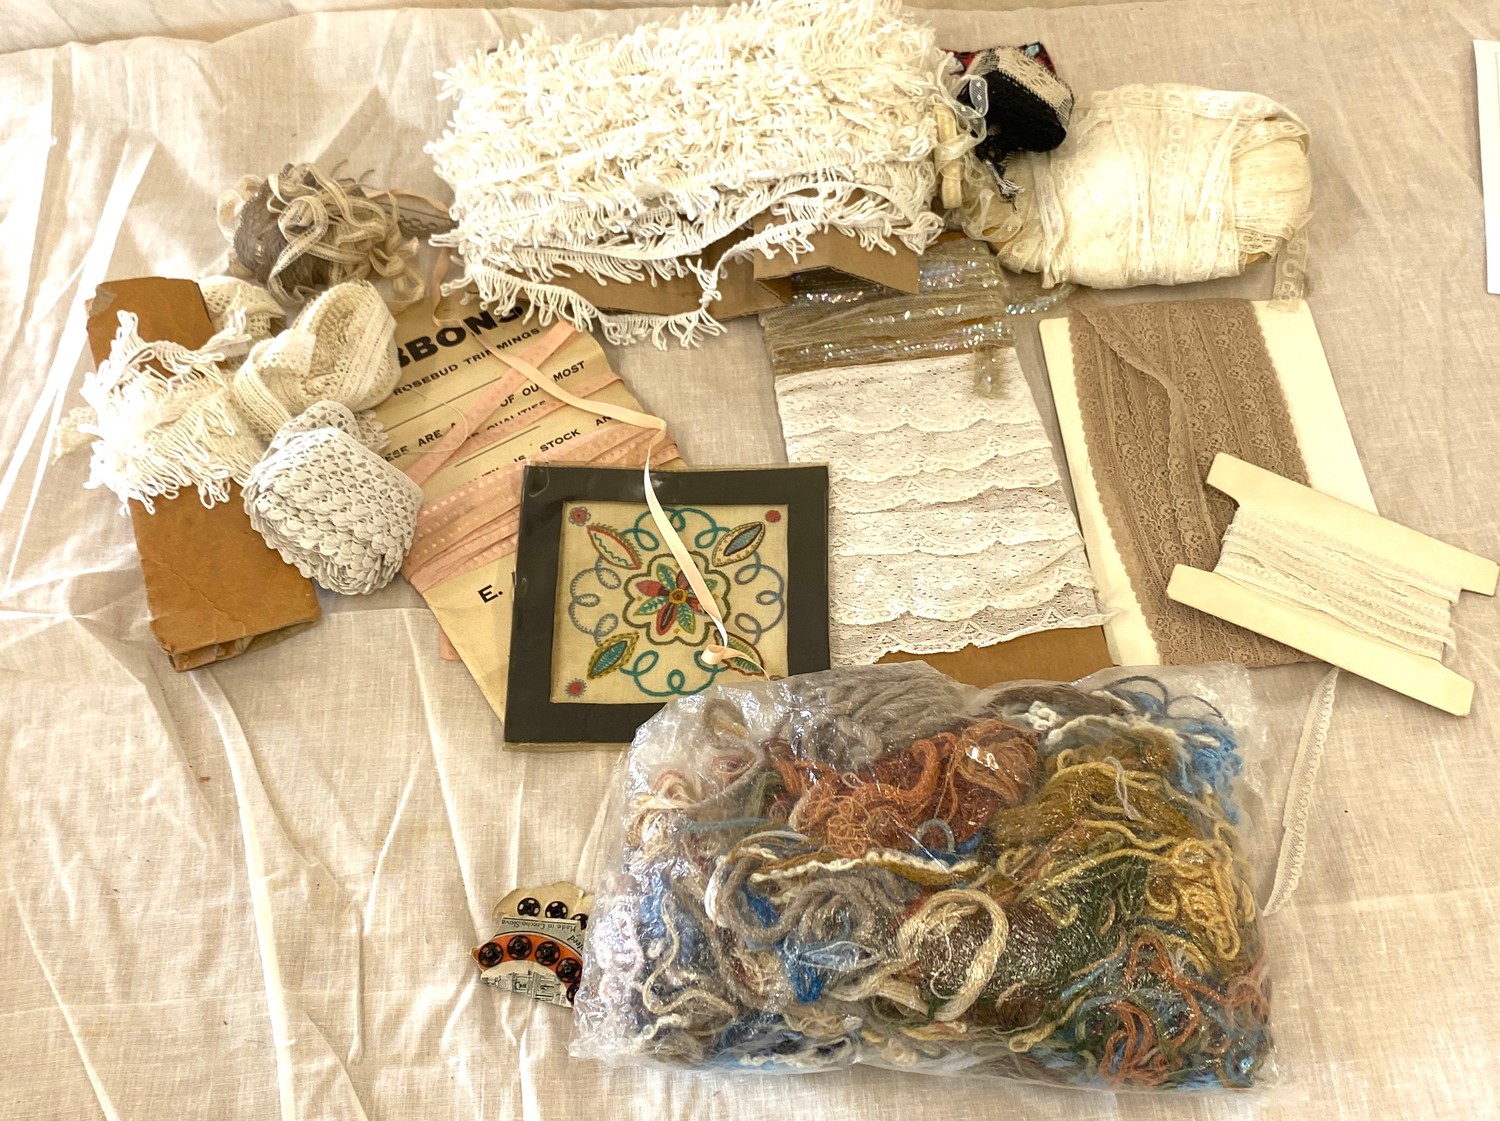 Large selection of lace trimmings etc